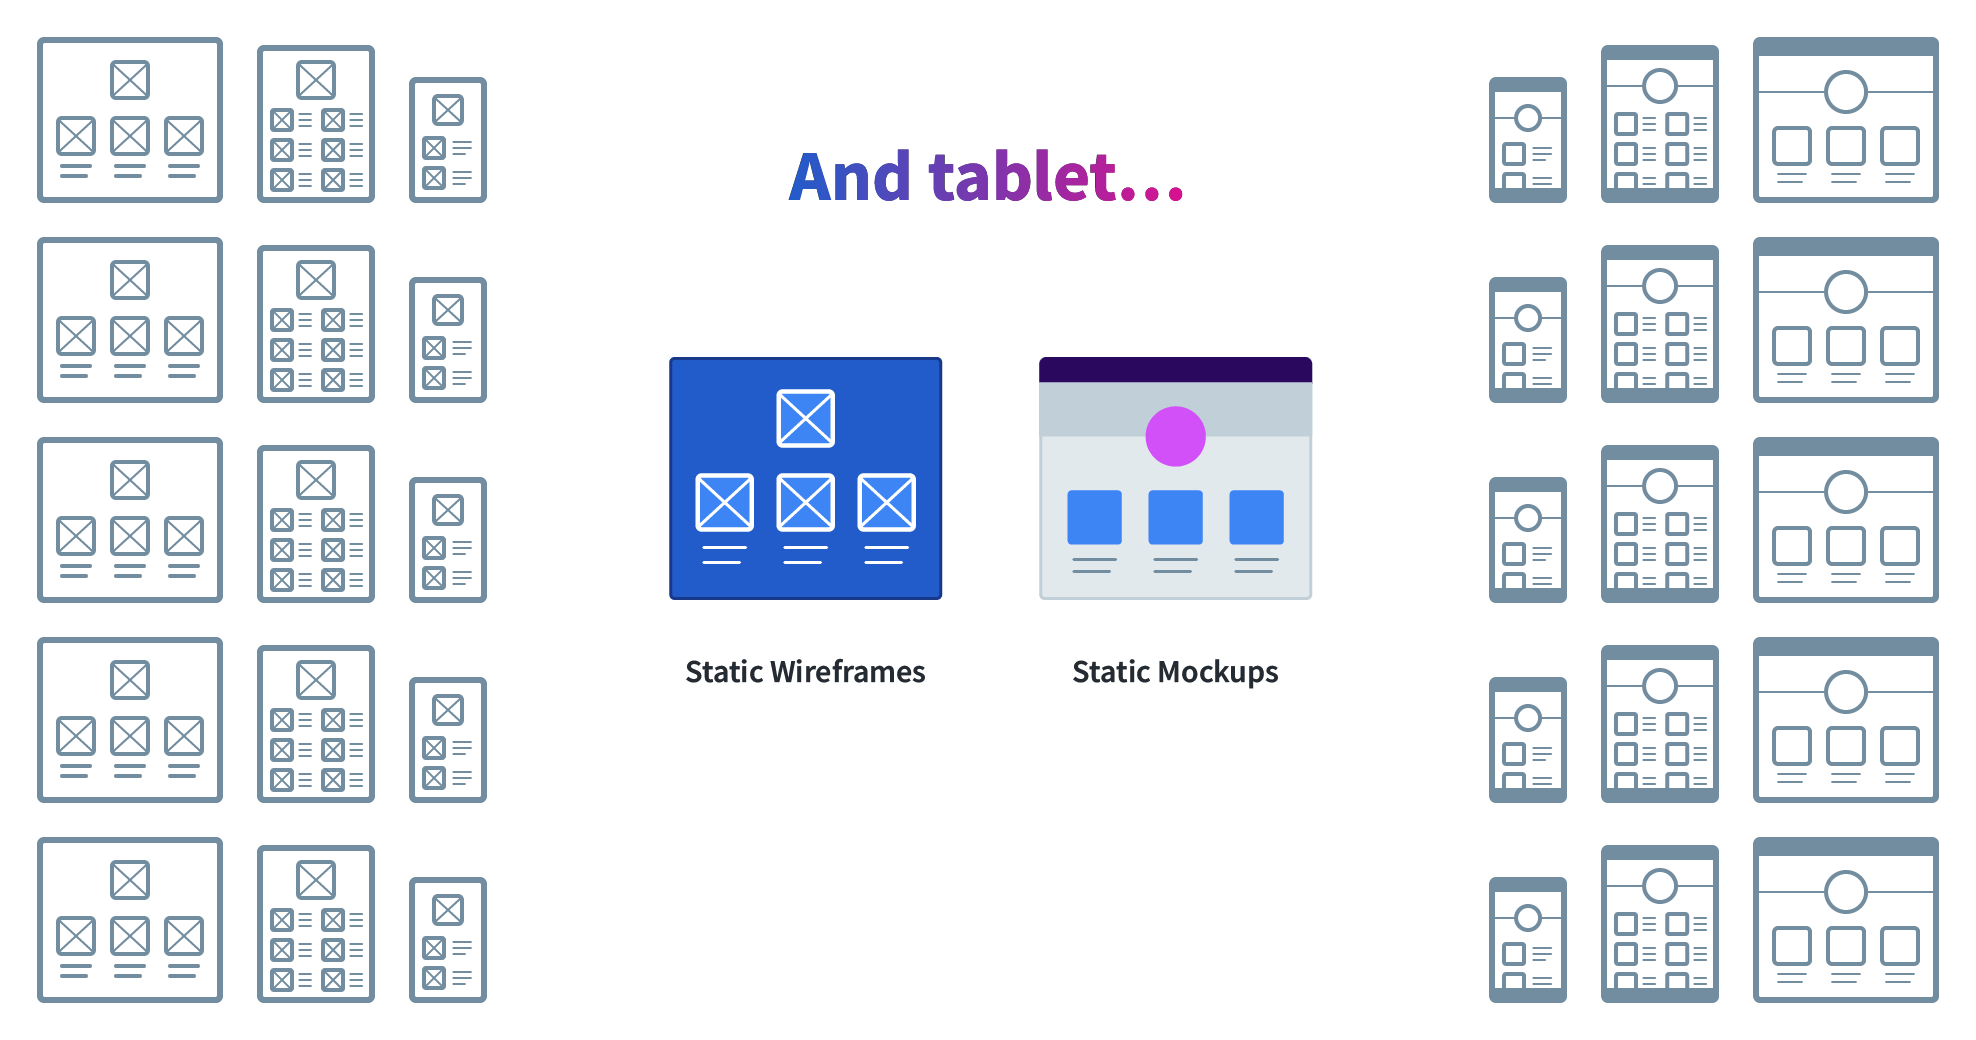 Five tablet wireframe and mockup icons are added to the previous image with the title, 'And tablet…'.